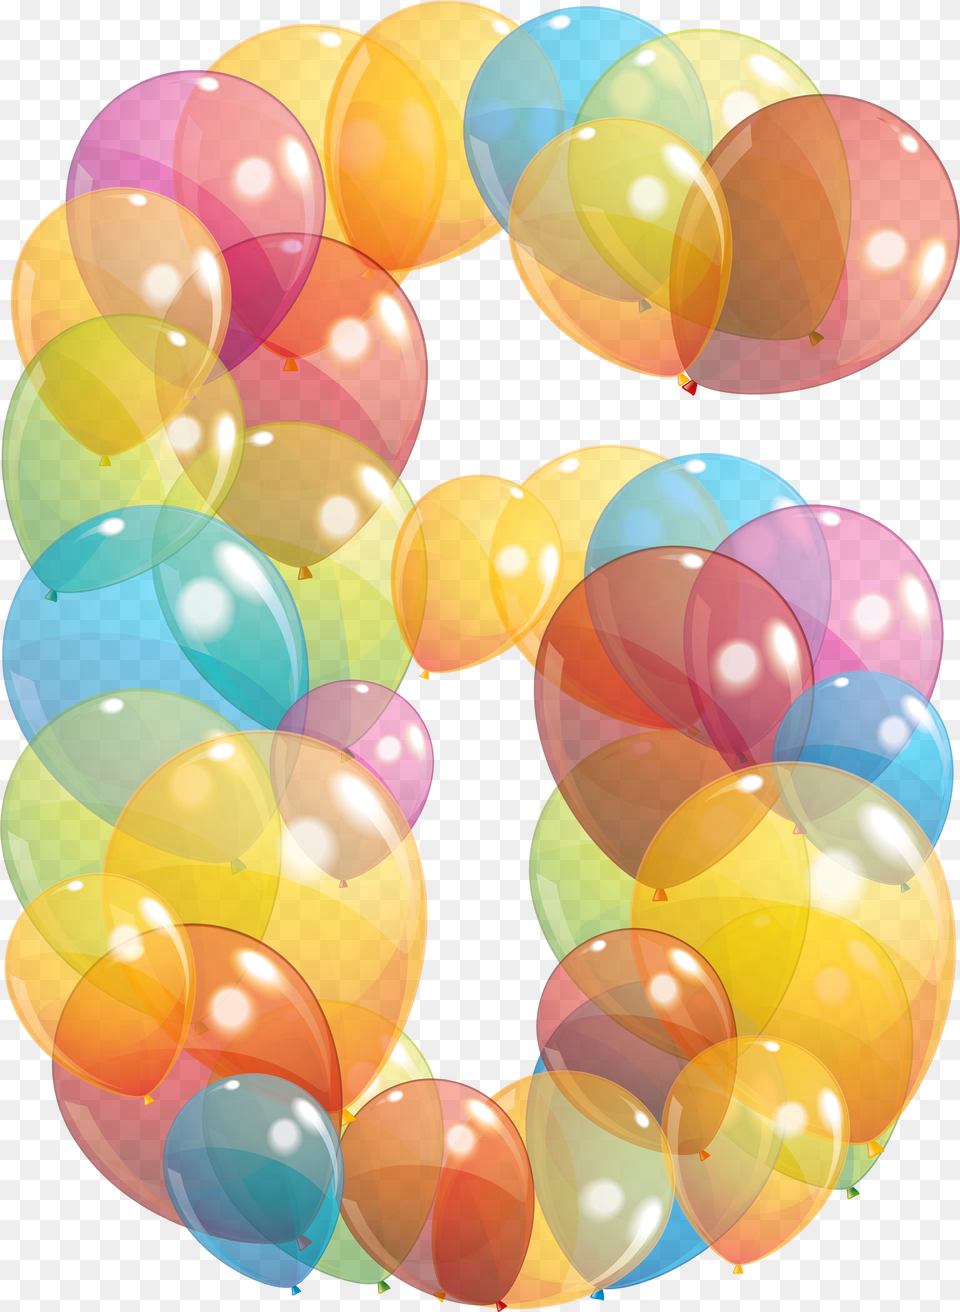 Real Balloons Background Balloons, Balloon Png Image